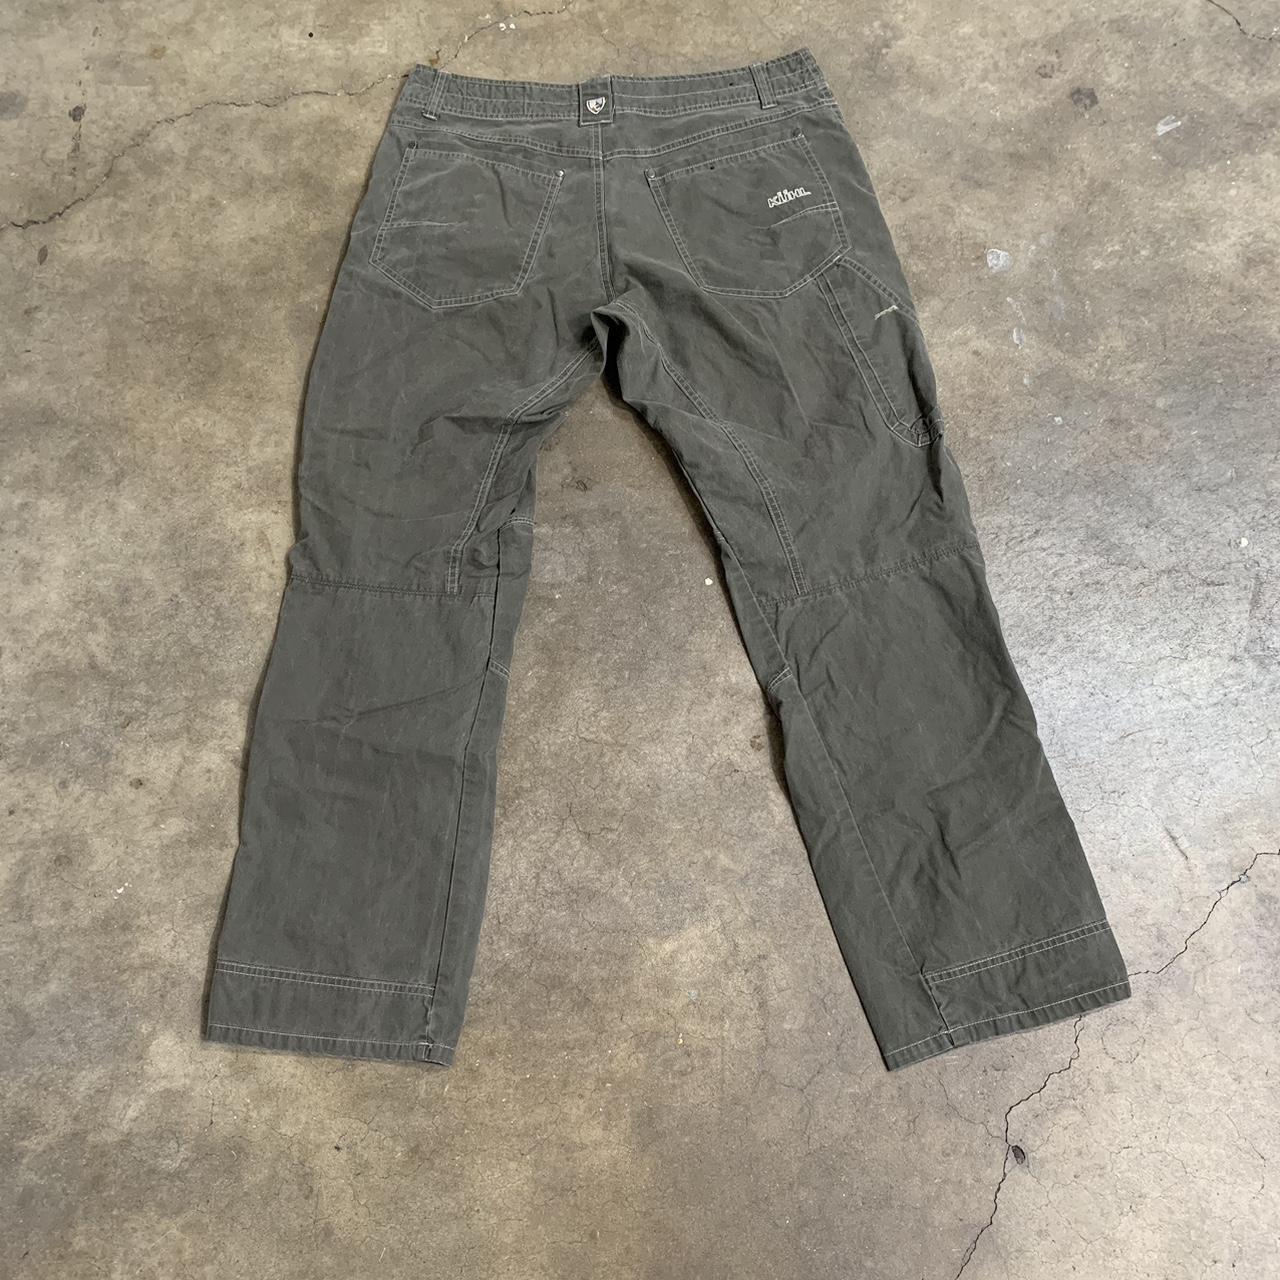 Kuhl pants in good condition Has a small rip on... - Depop